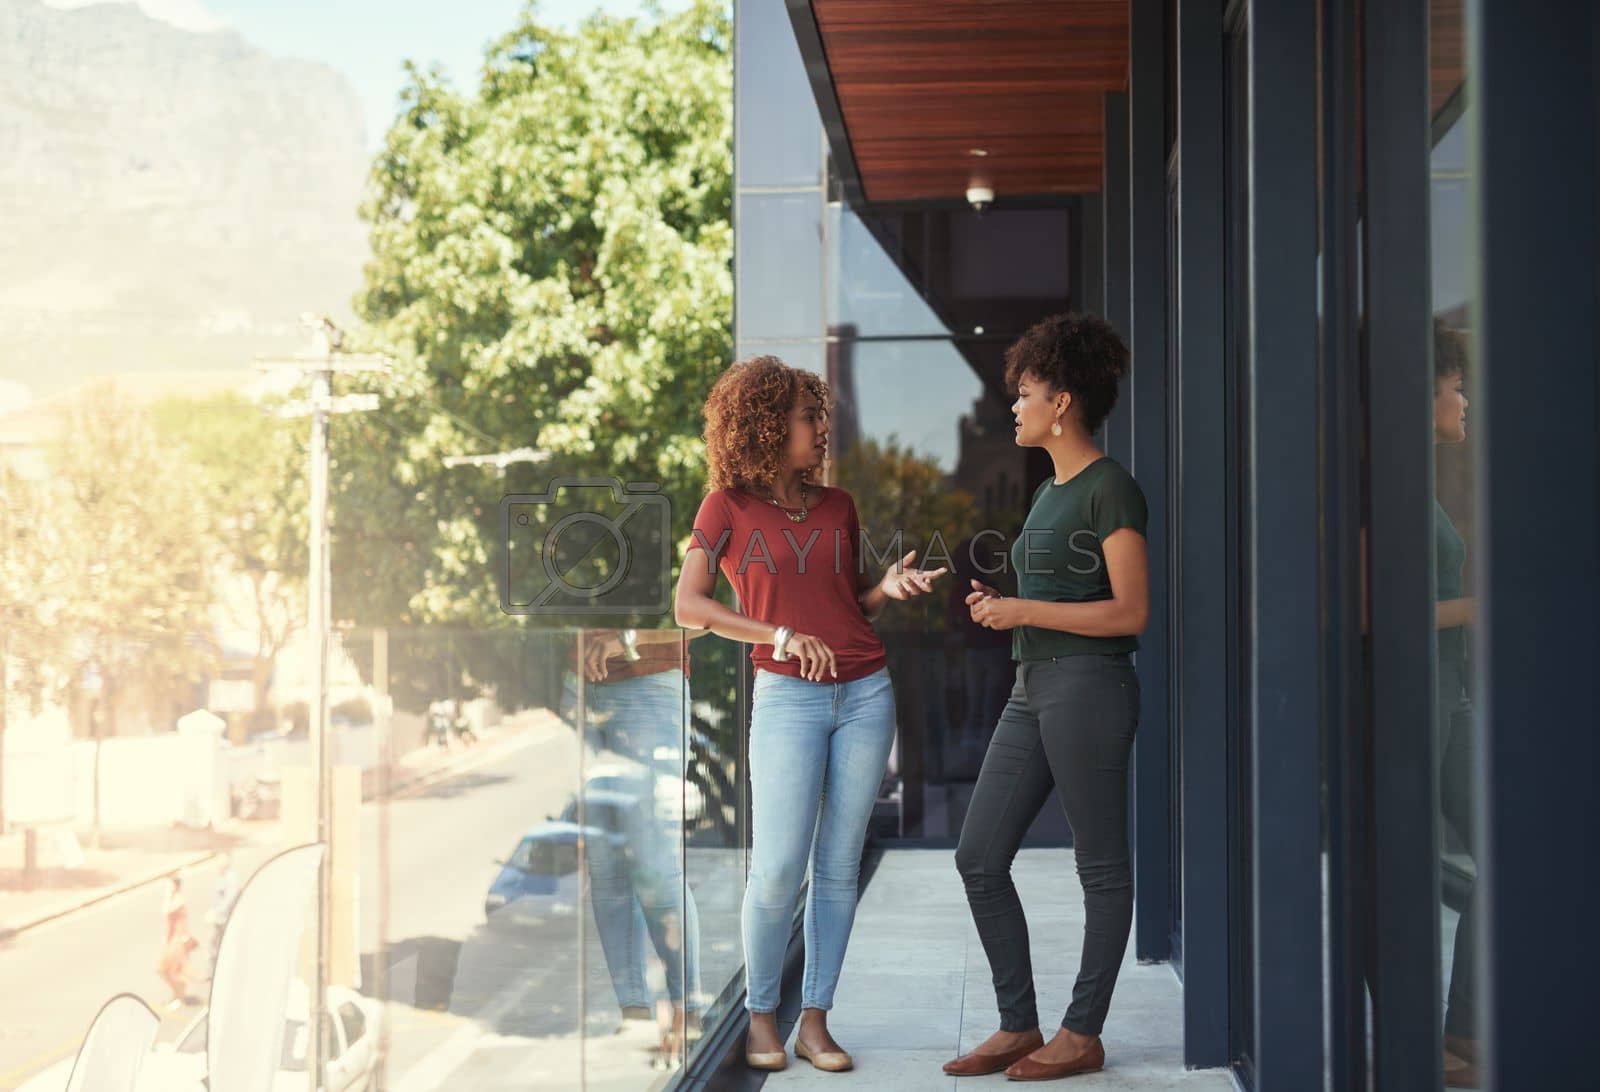 Communication in the workplace is important. two businesswomen chatting outside on a balcony